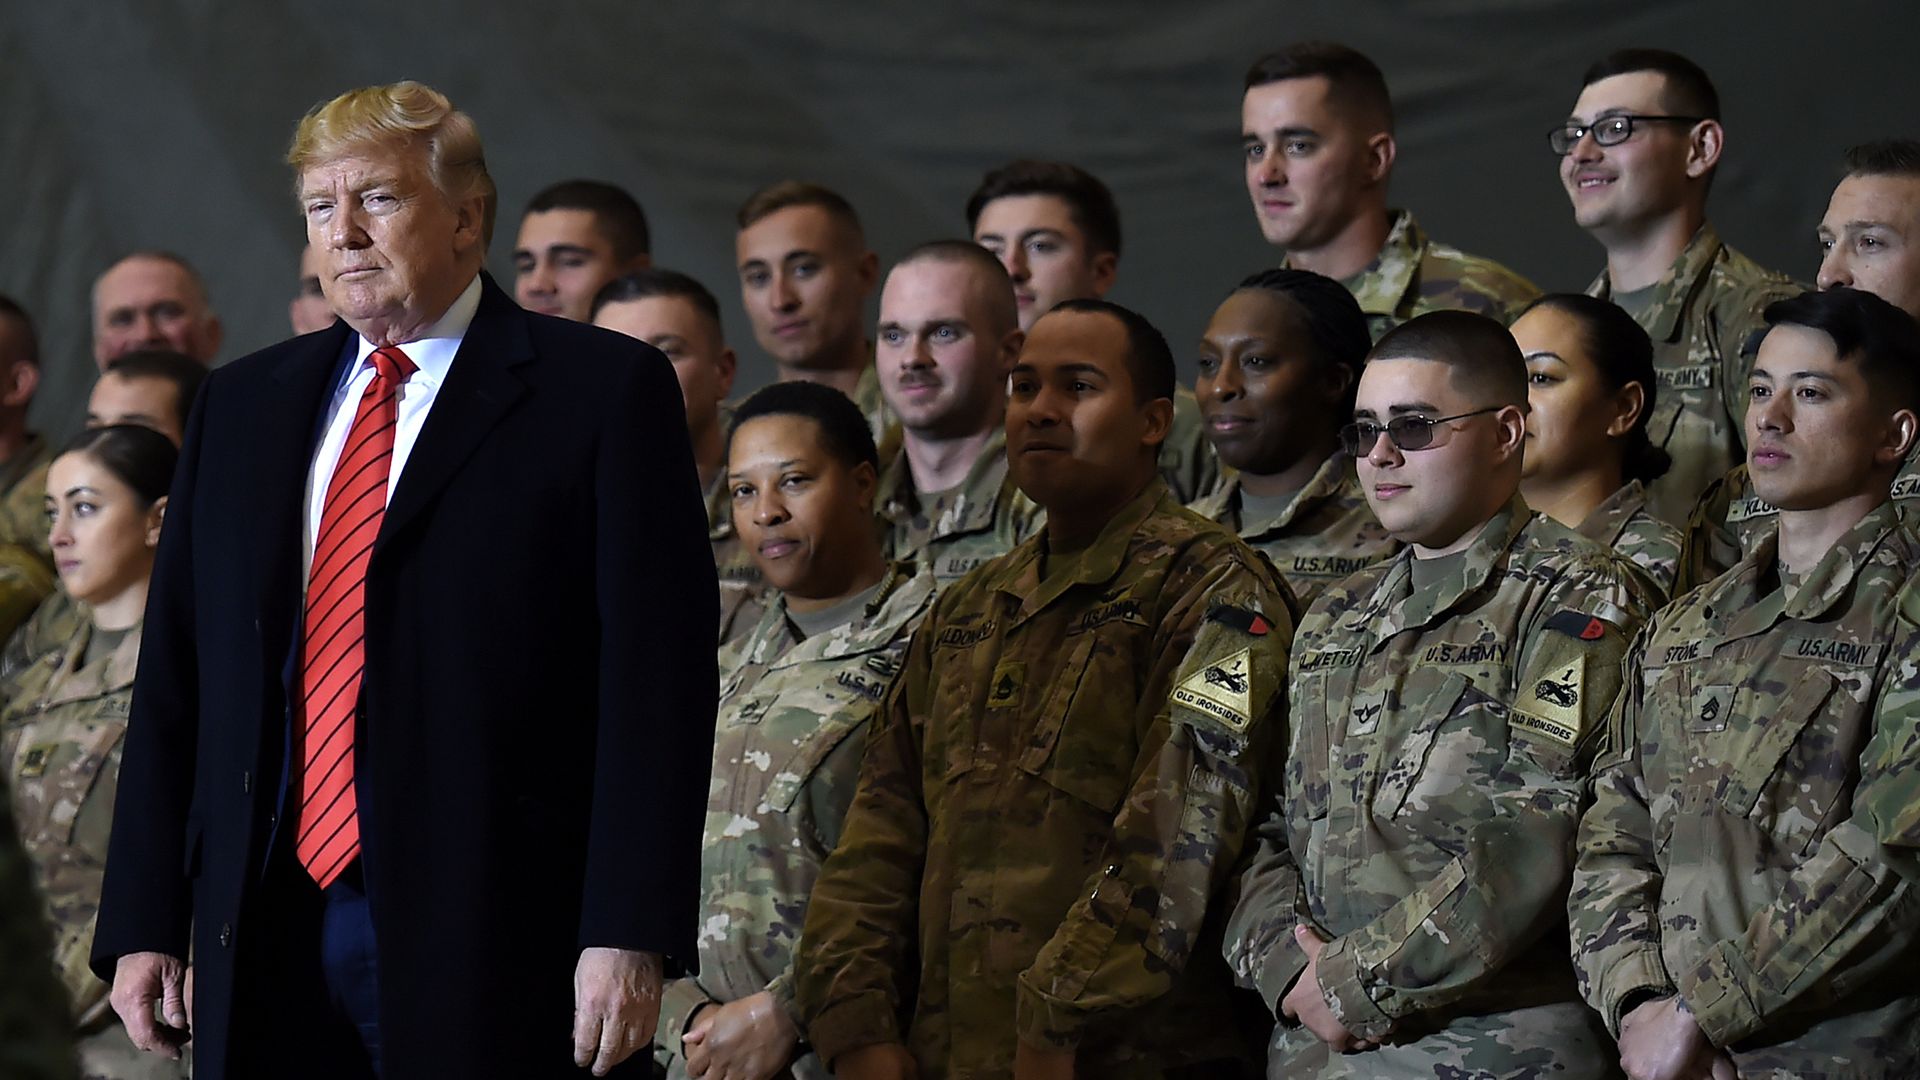 President Trump with American soldiers in Afghanistan